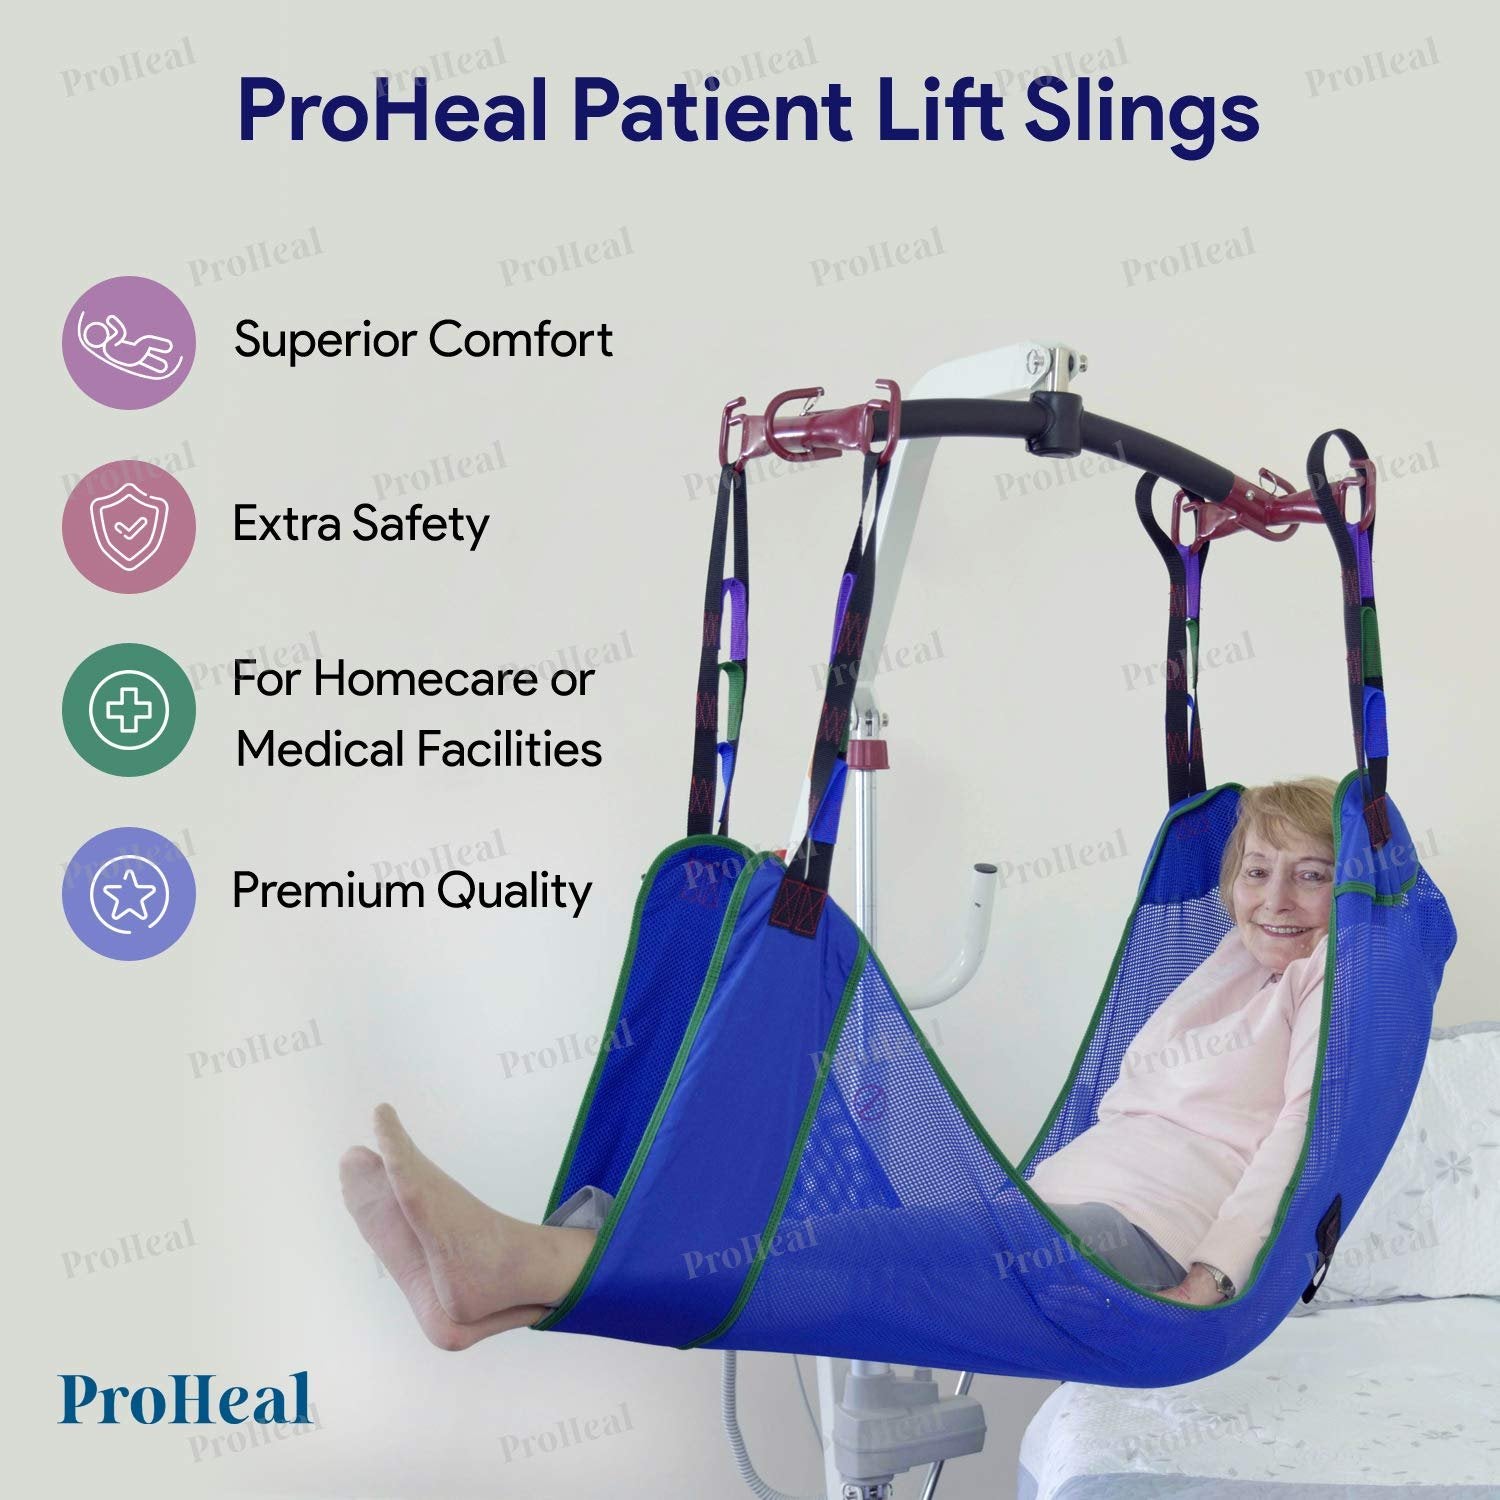 ProHeal Universal Padded Lift U Sling, X Large 44" x 48.5" - Polyester Divided Leg Slings for Patient Lifts - Compatible with Hoyer, Invacare, McKesson, Drive, Lumex, Joerns and More